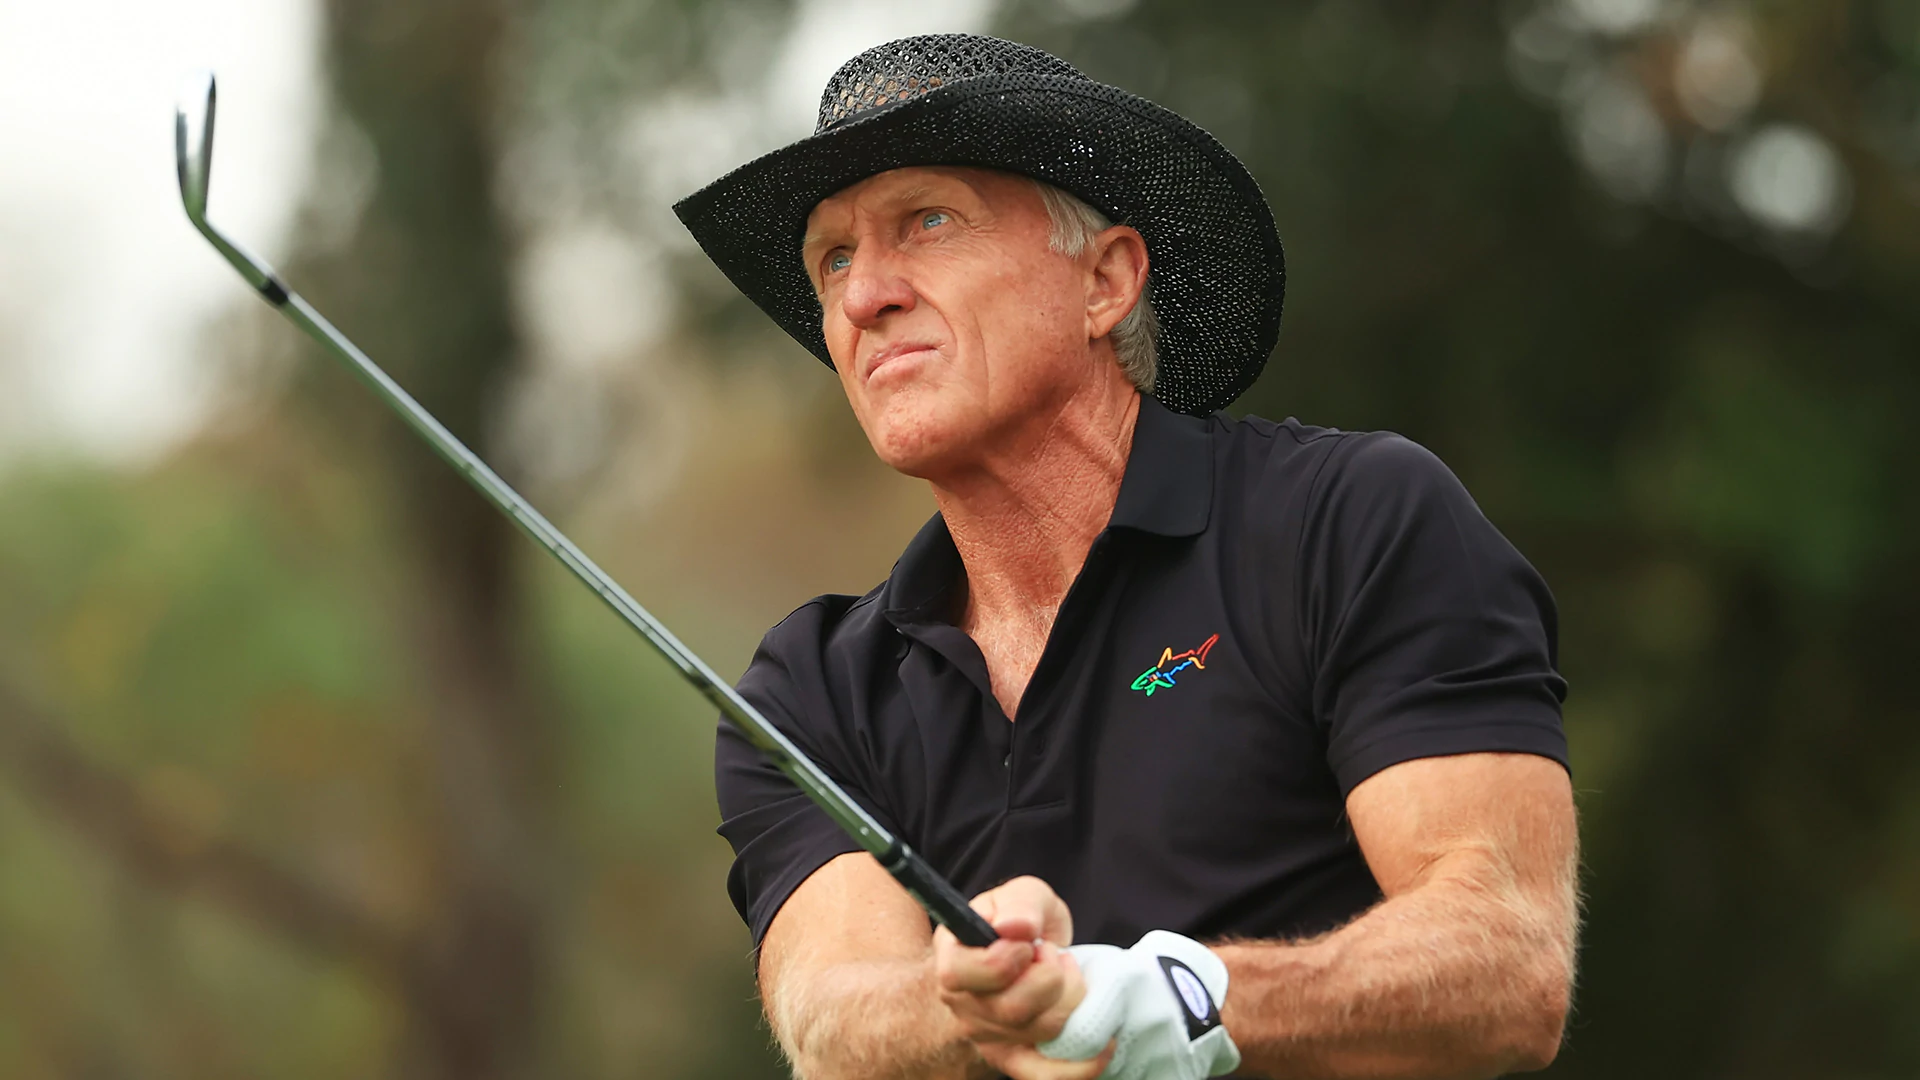 Reports: Saudi-backed tour taking shape with Greg Norman as commissioner